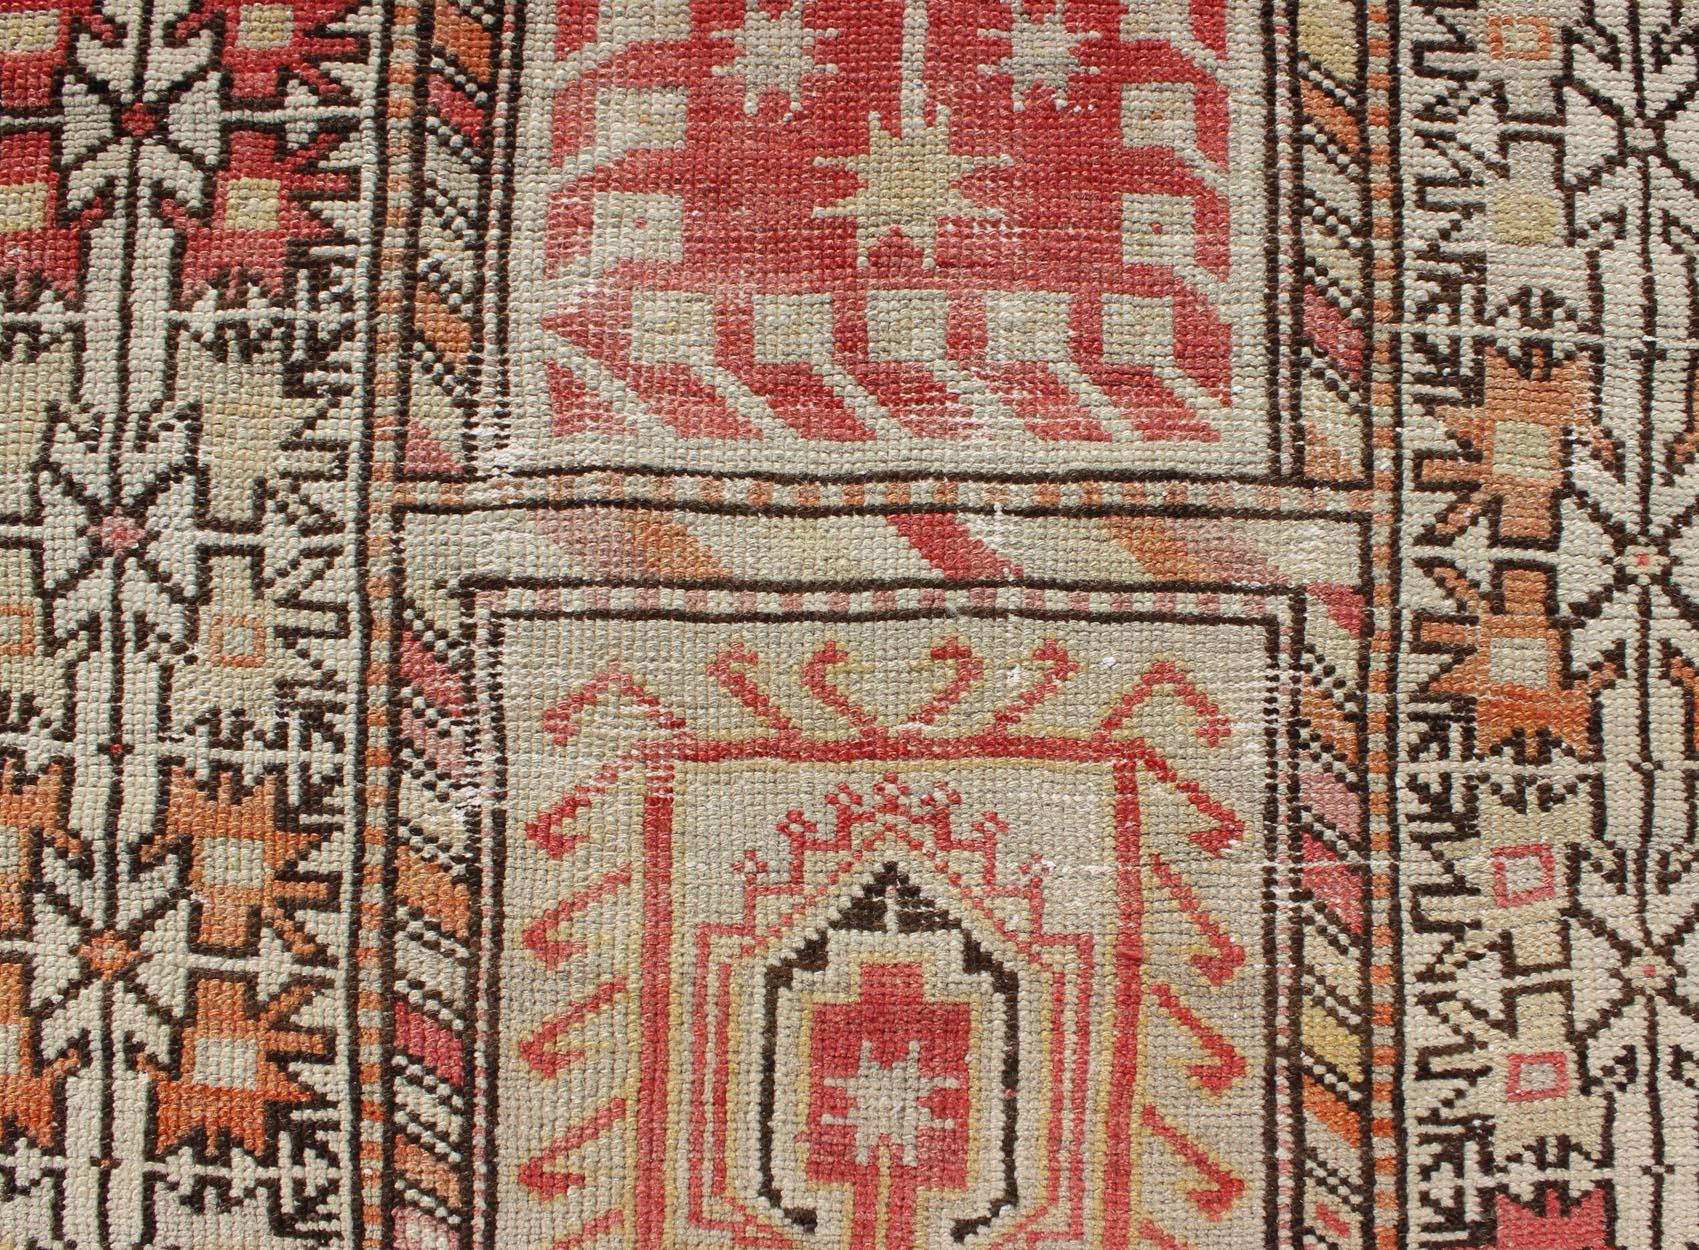 Early 20th Century Tribal-Geometric Design Antique Turkish Oushak Rug in Burnt Orange and Brown For Sale